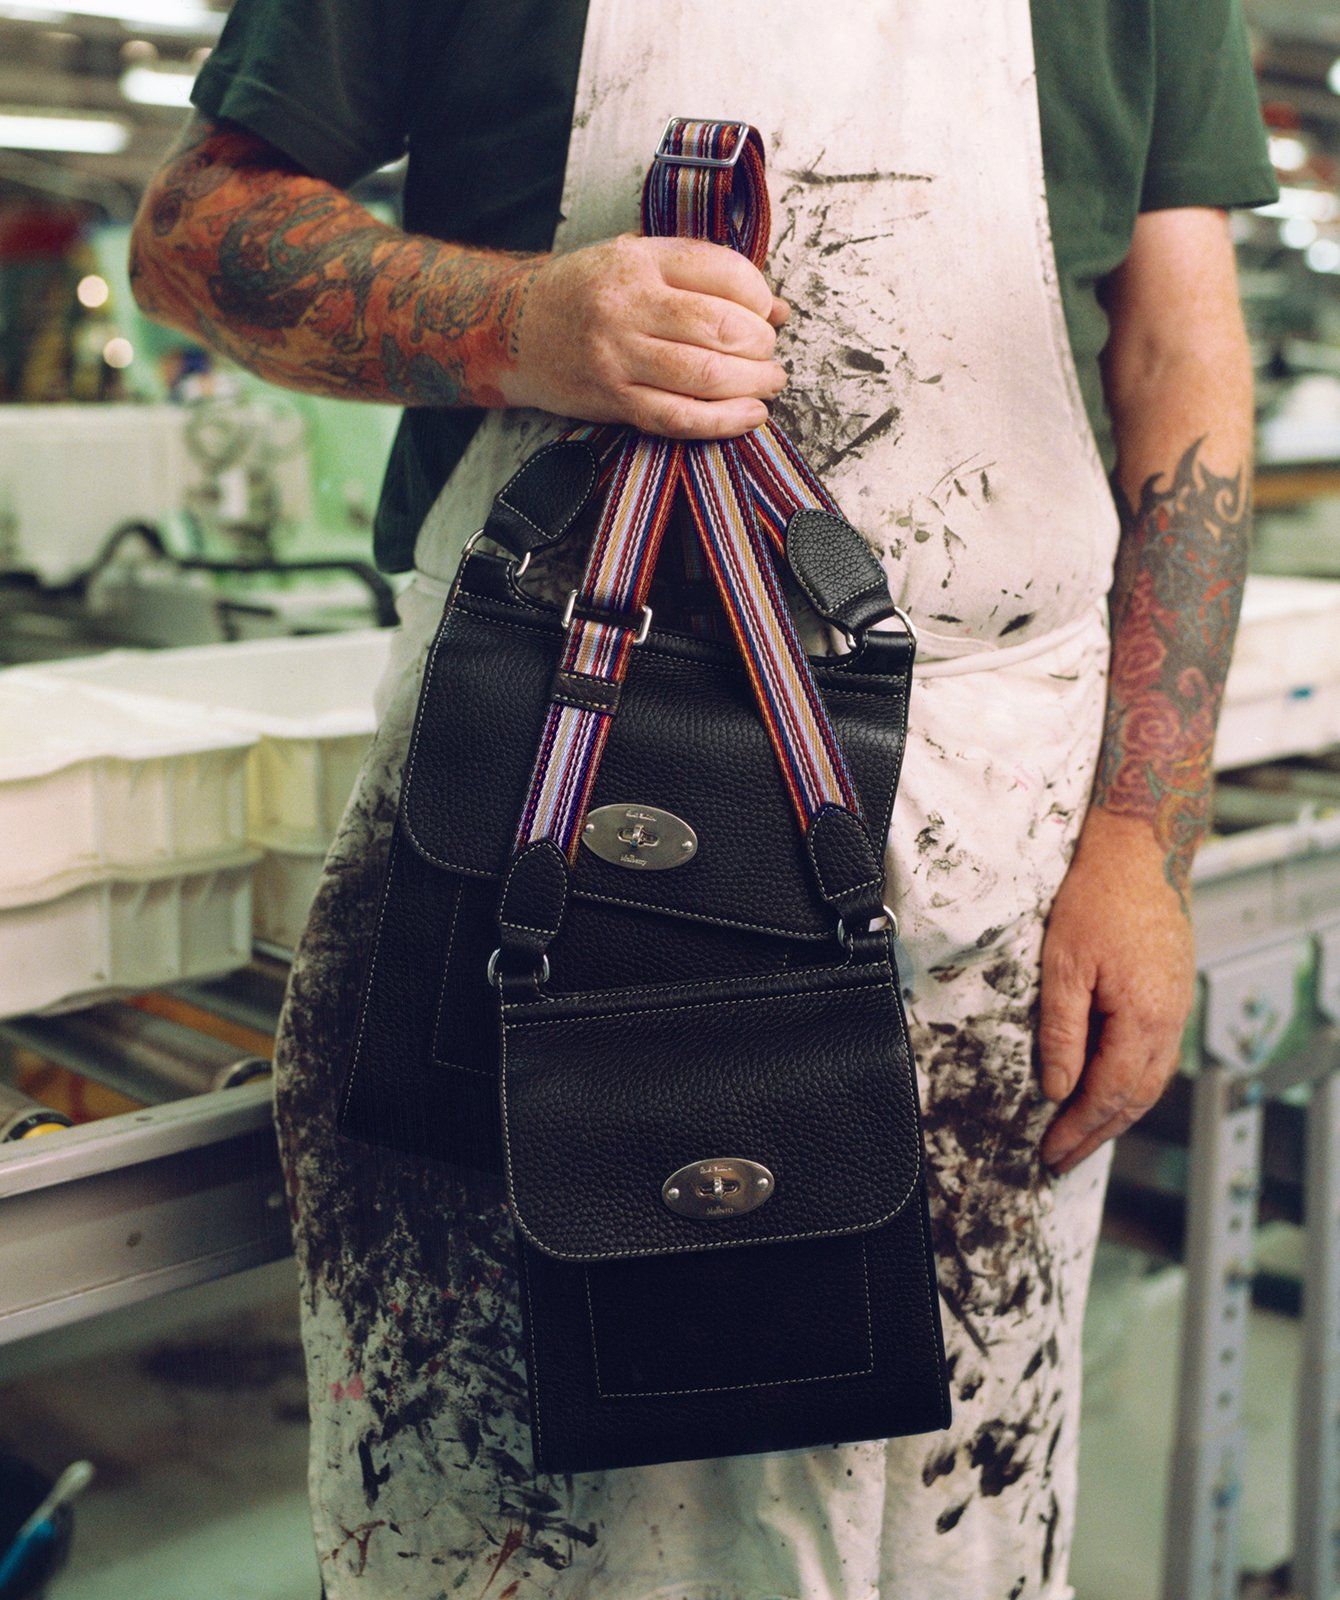 mullberry worker holding mulberry paul smith antony and small antony bags in black